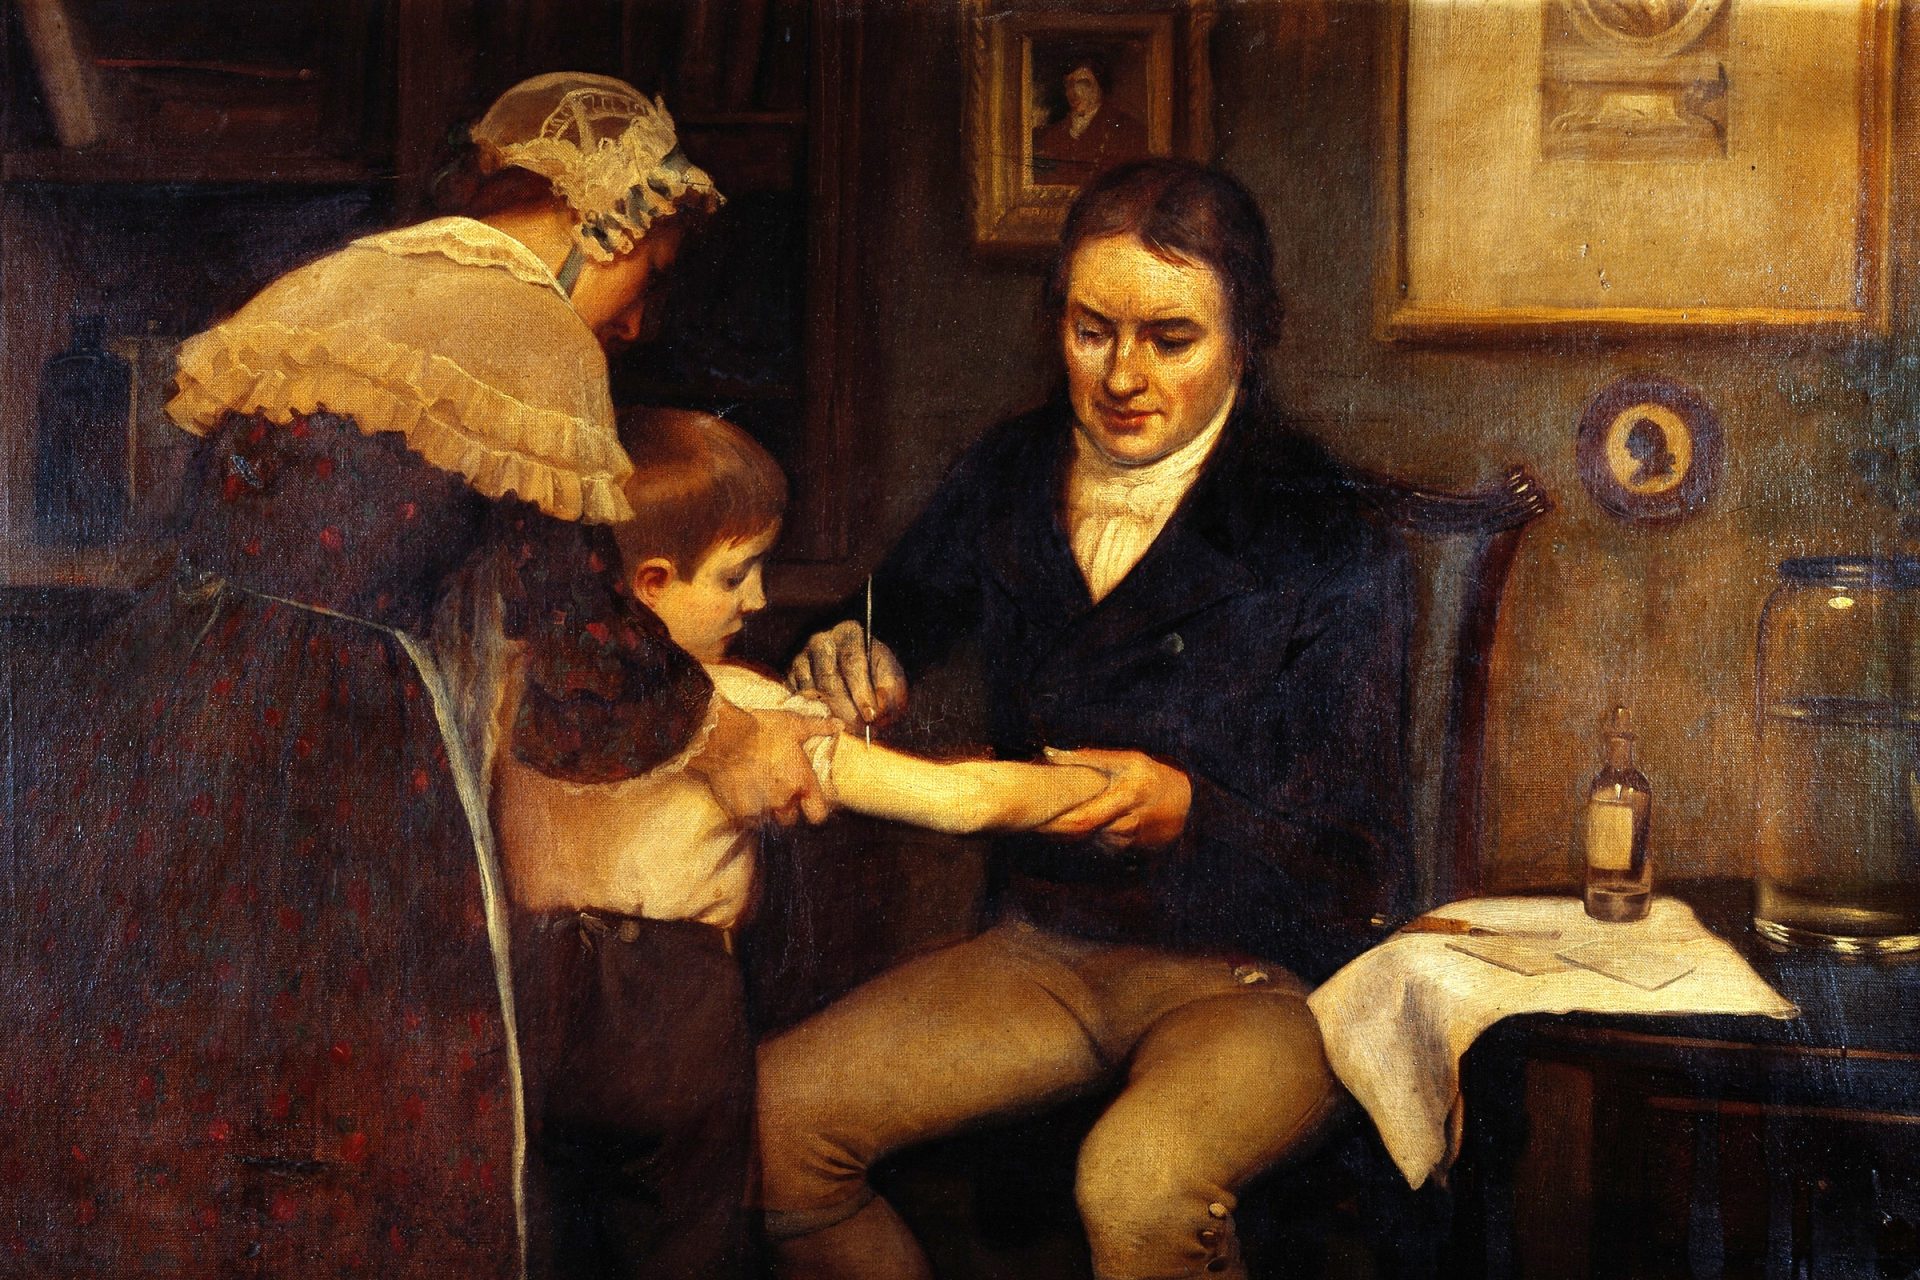 Who Learned the First Vaccine?